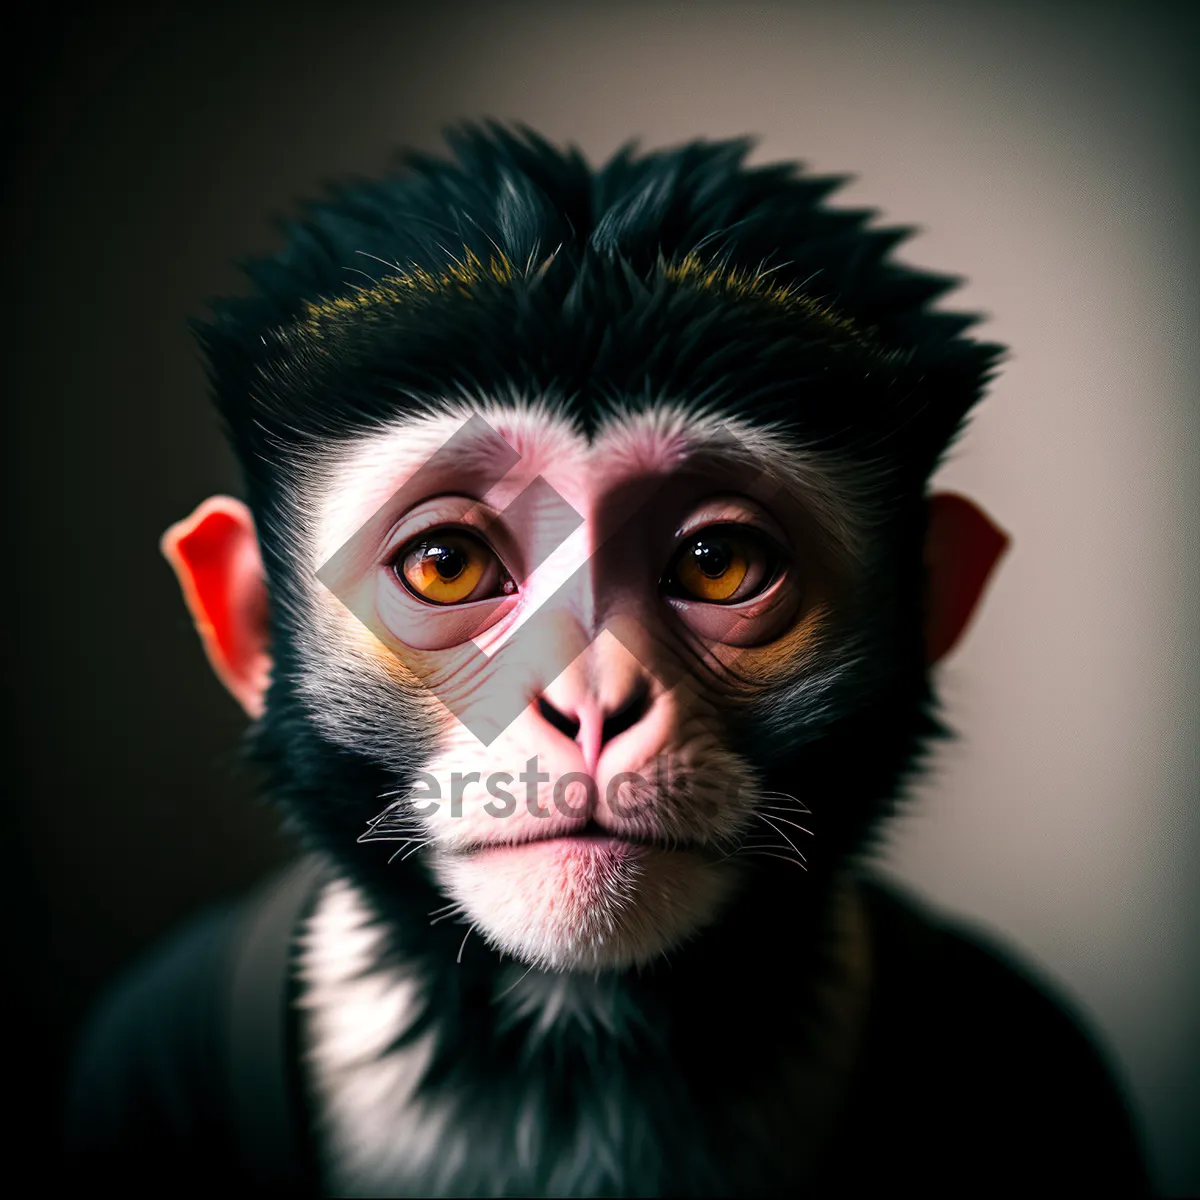 Picture of Adorable Baby Primate With Piercing Black Eyes